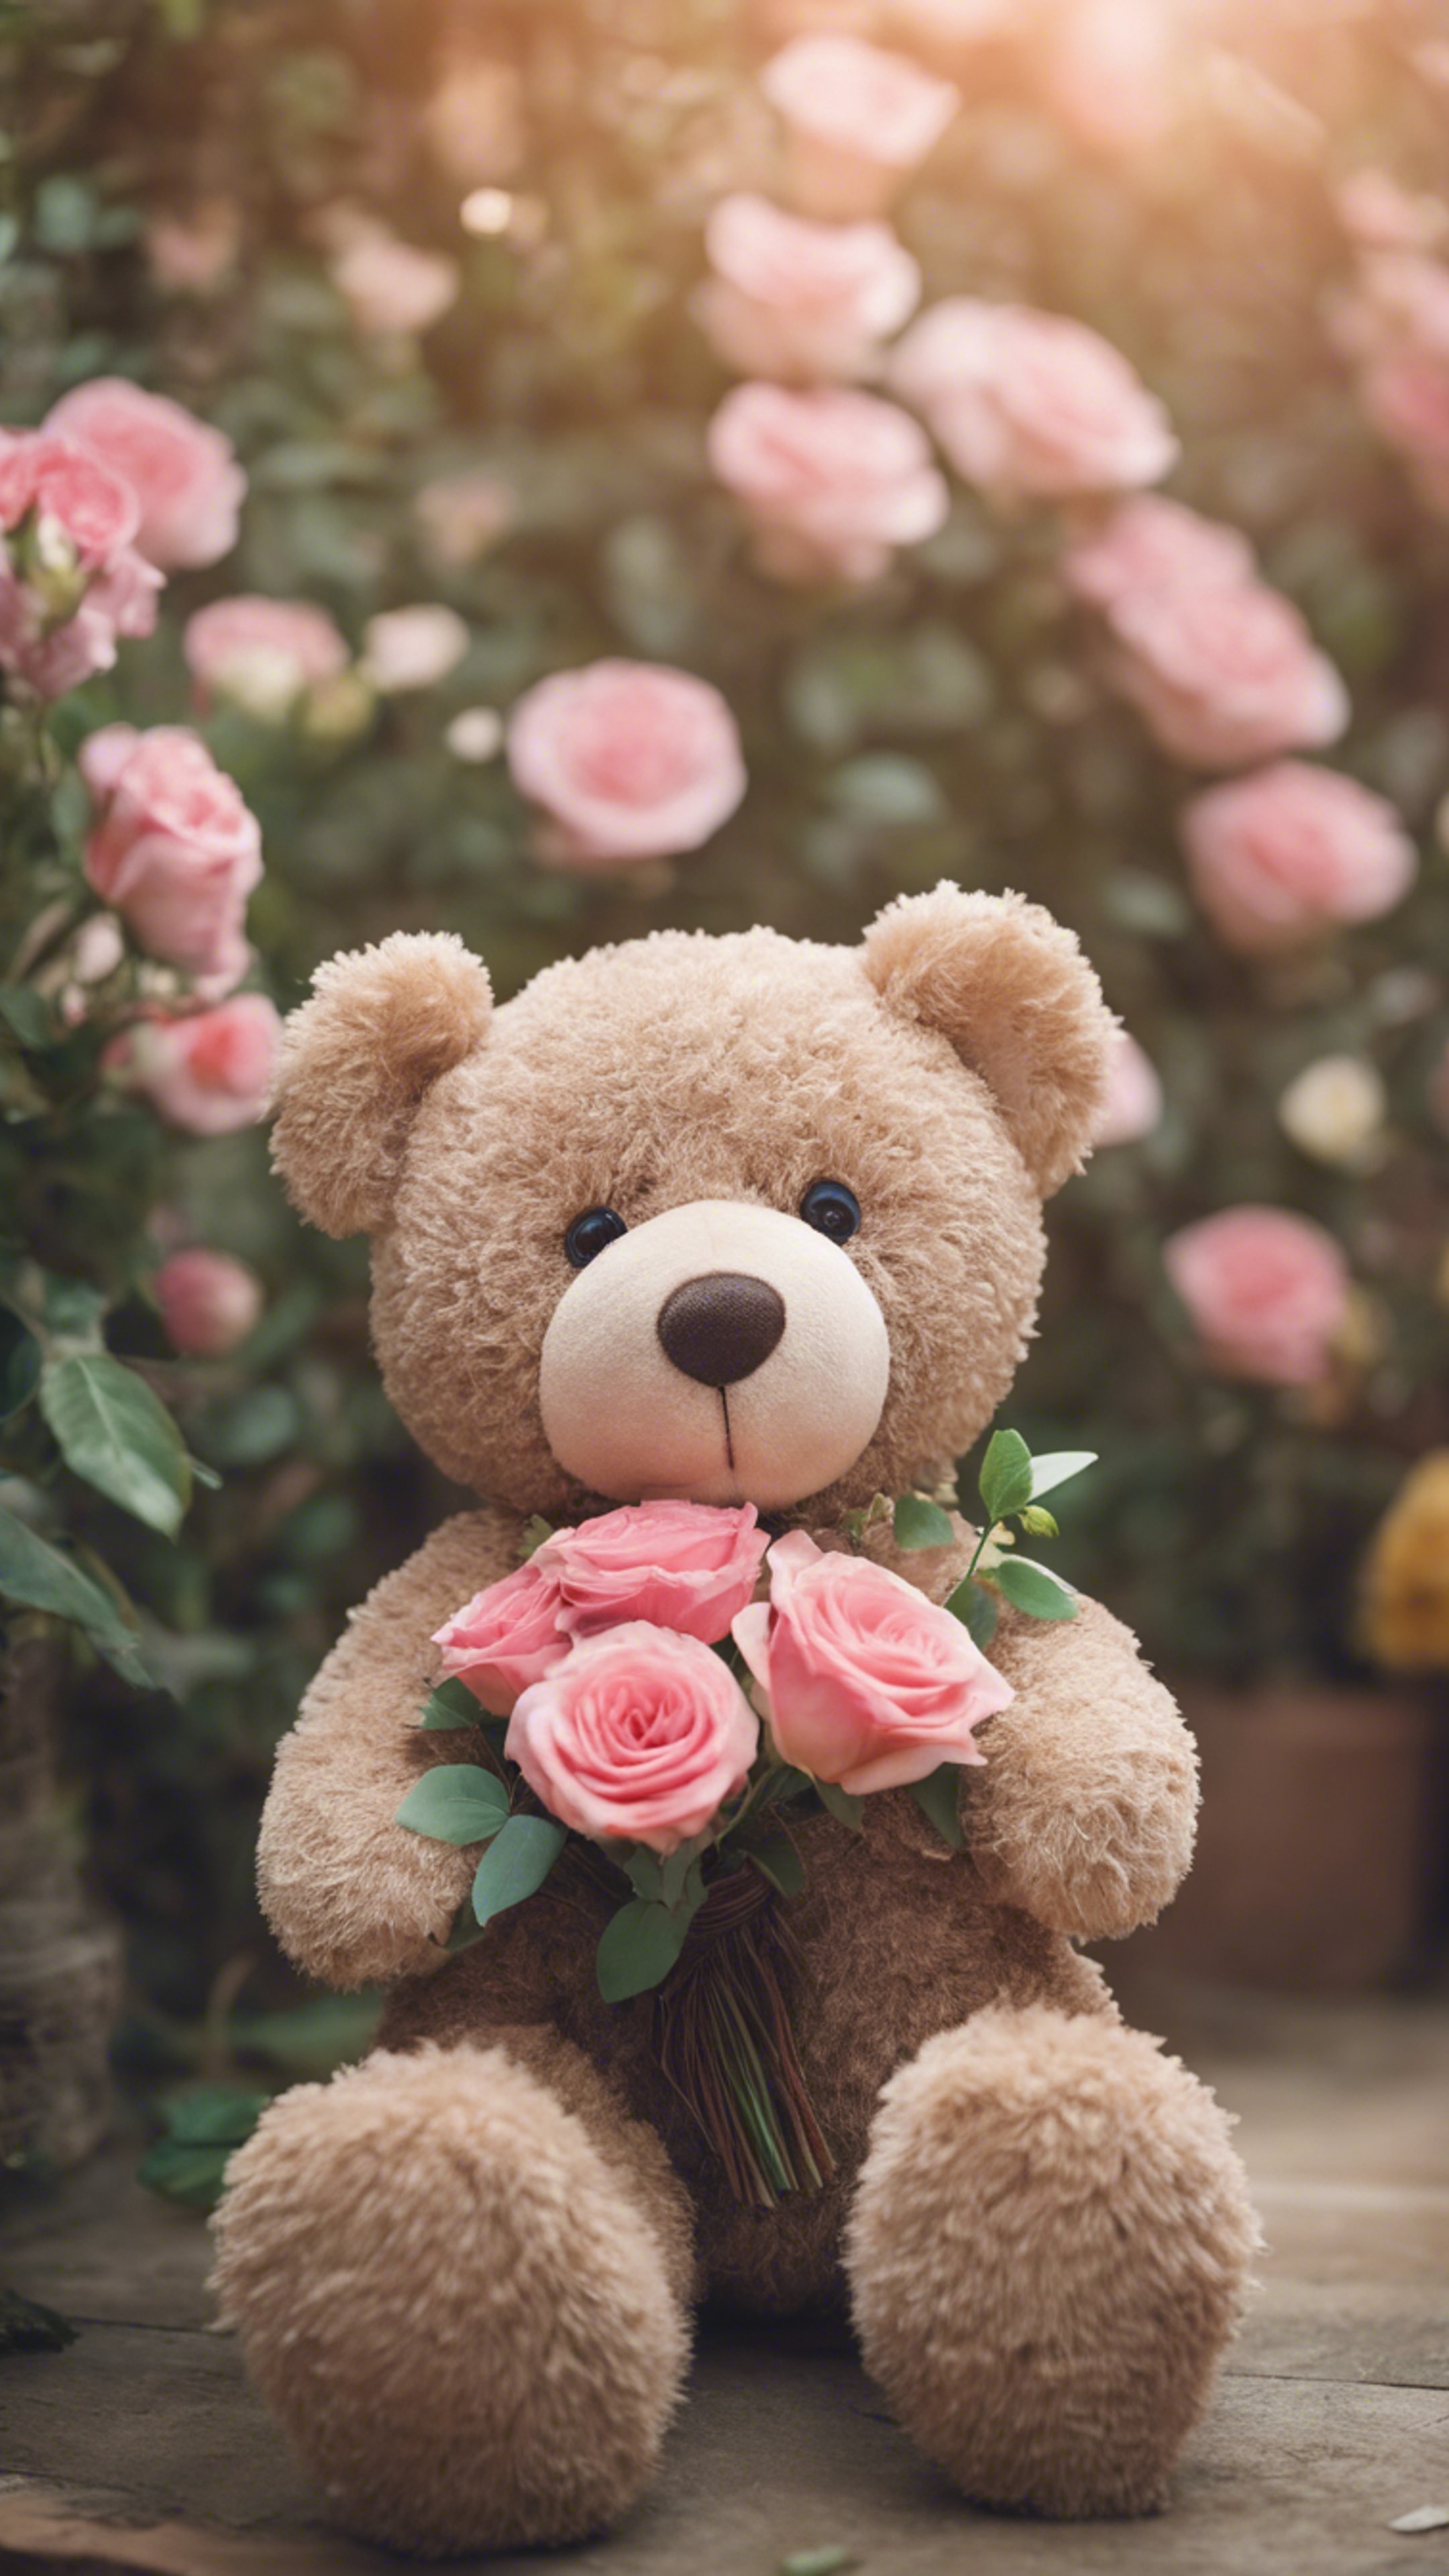 A teddy bear in a romantic setting, holding a bouquet of roses. ورق الجدران[0c0a94ba405548b0bff3]